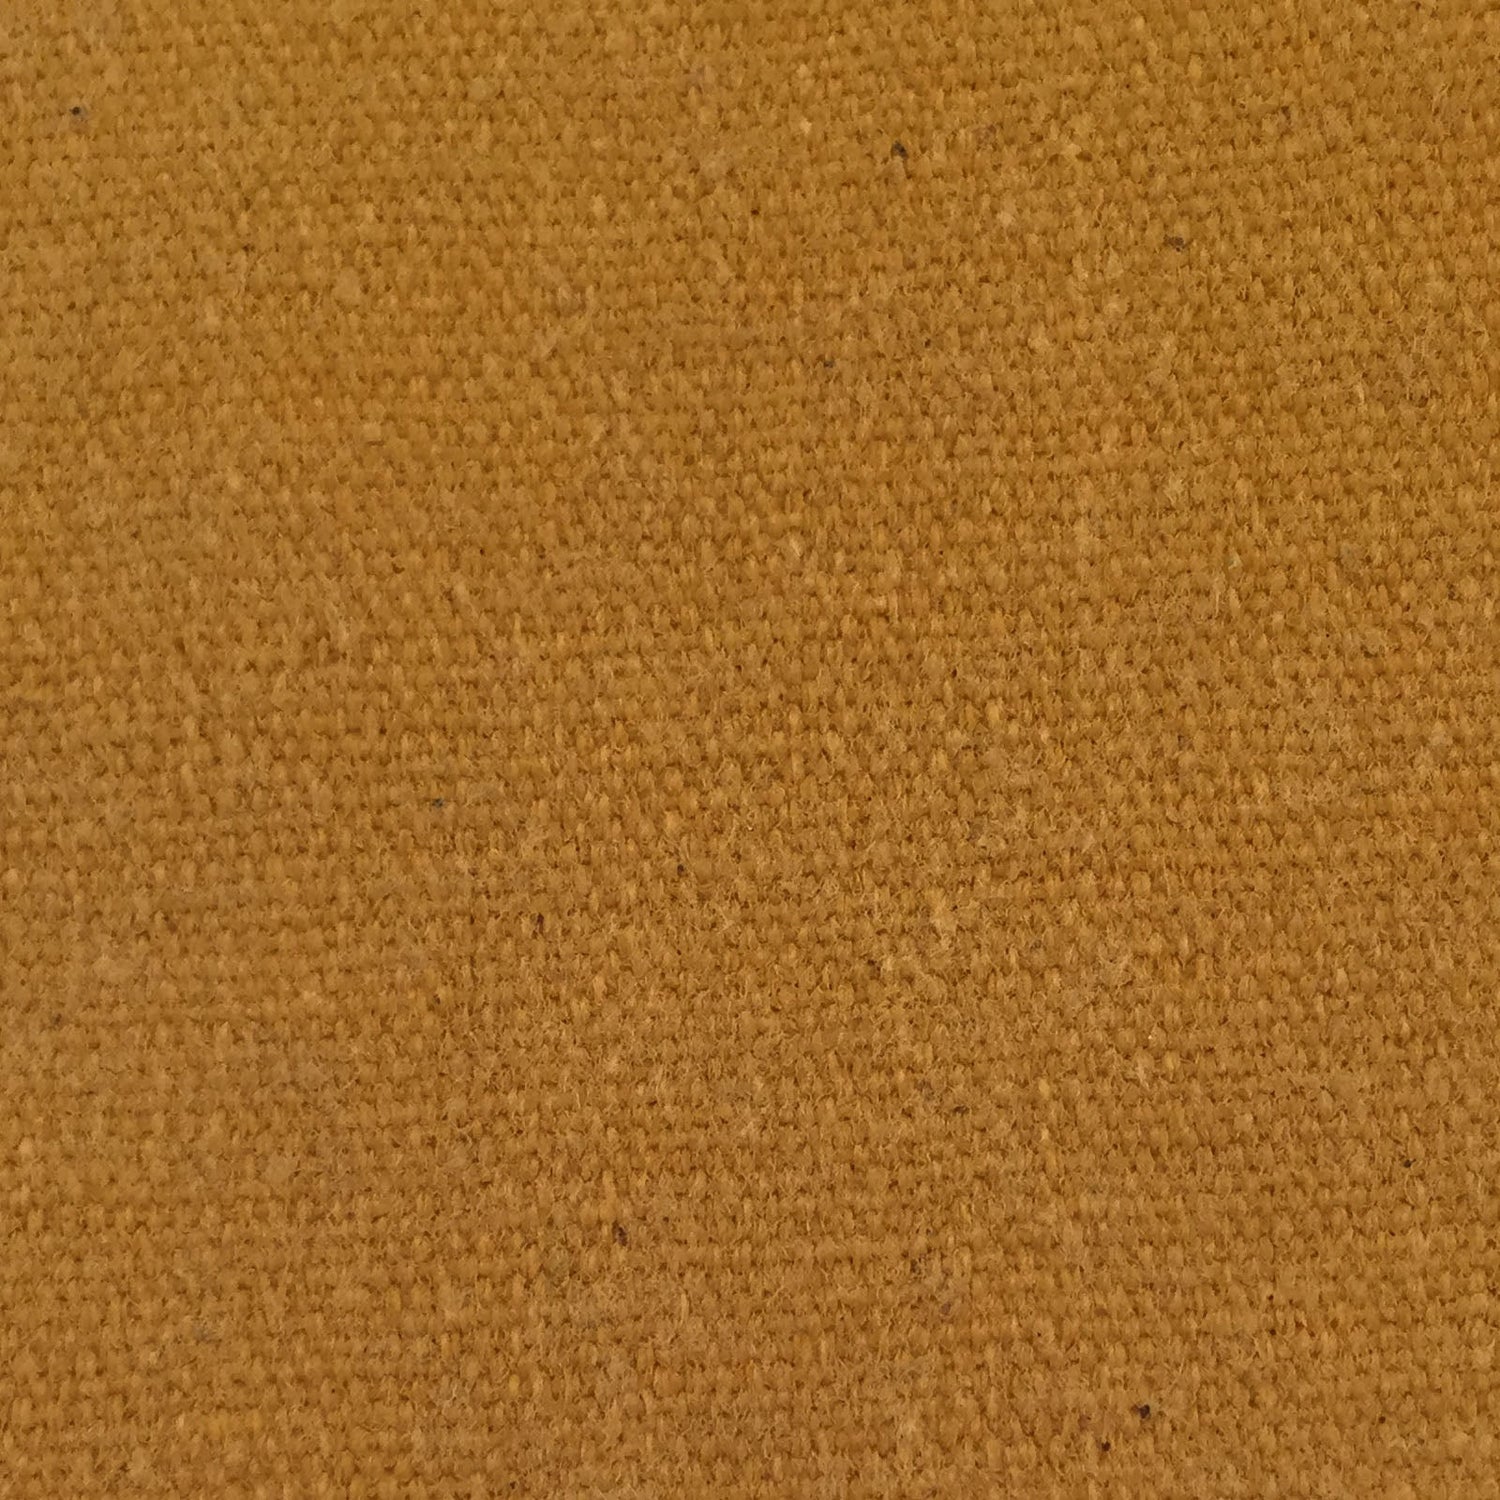 16 oz Canvas Treated Water Resistant Fabric [60" x 75 Yards]